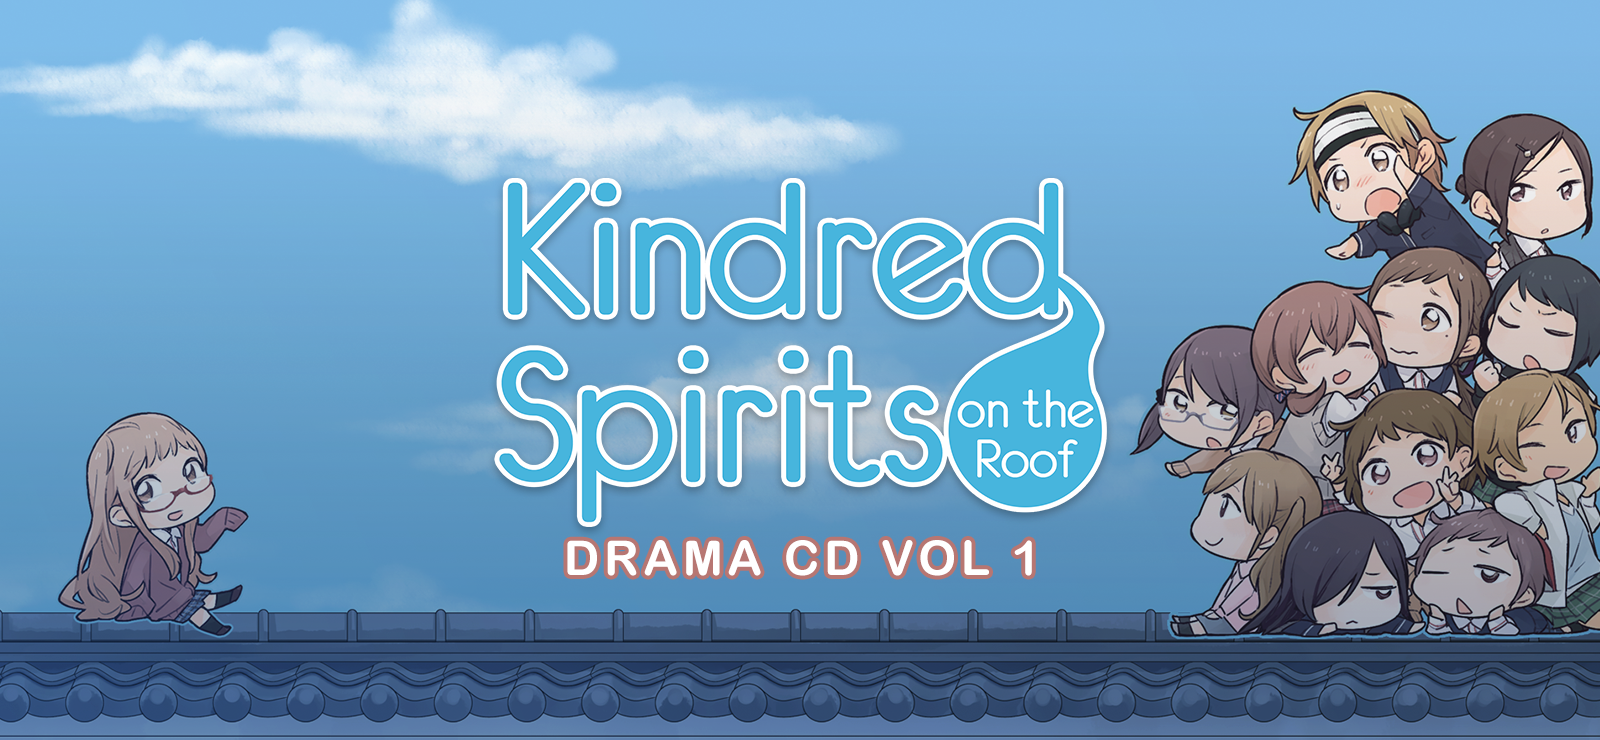 Kindred Spirits On The Roof Drama CD Vol.1